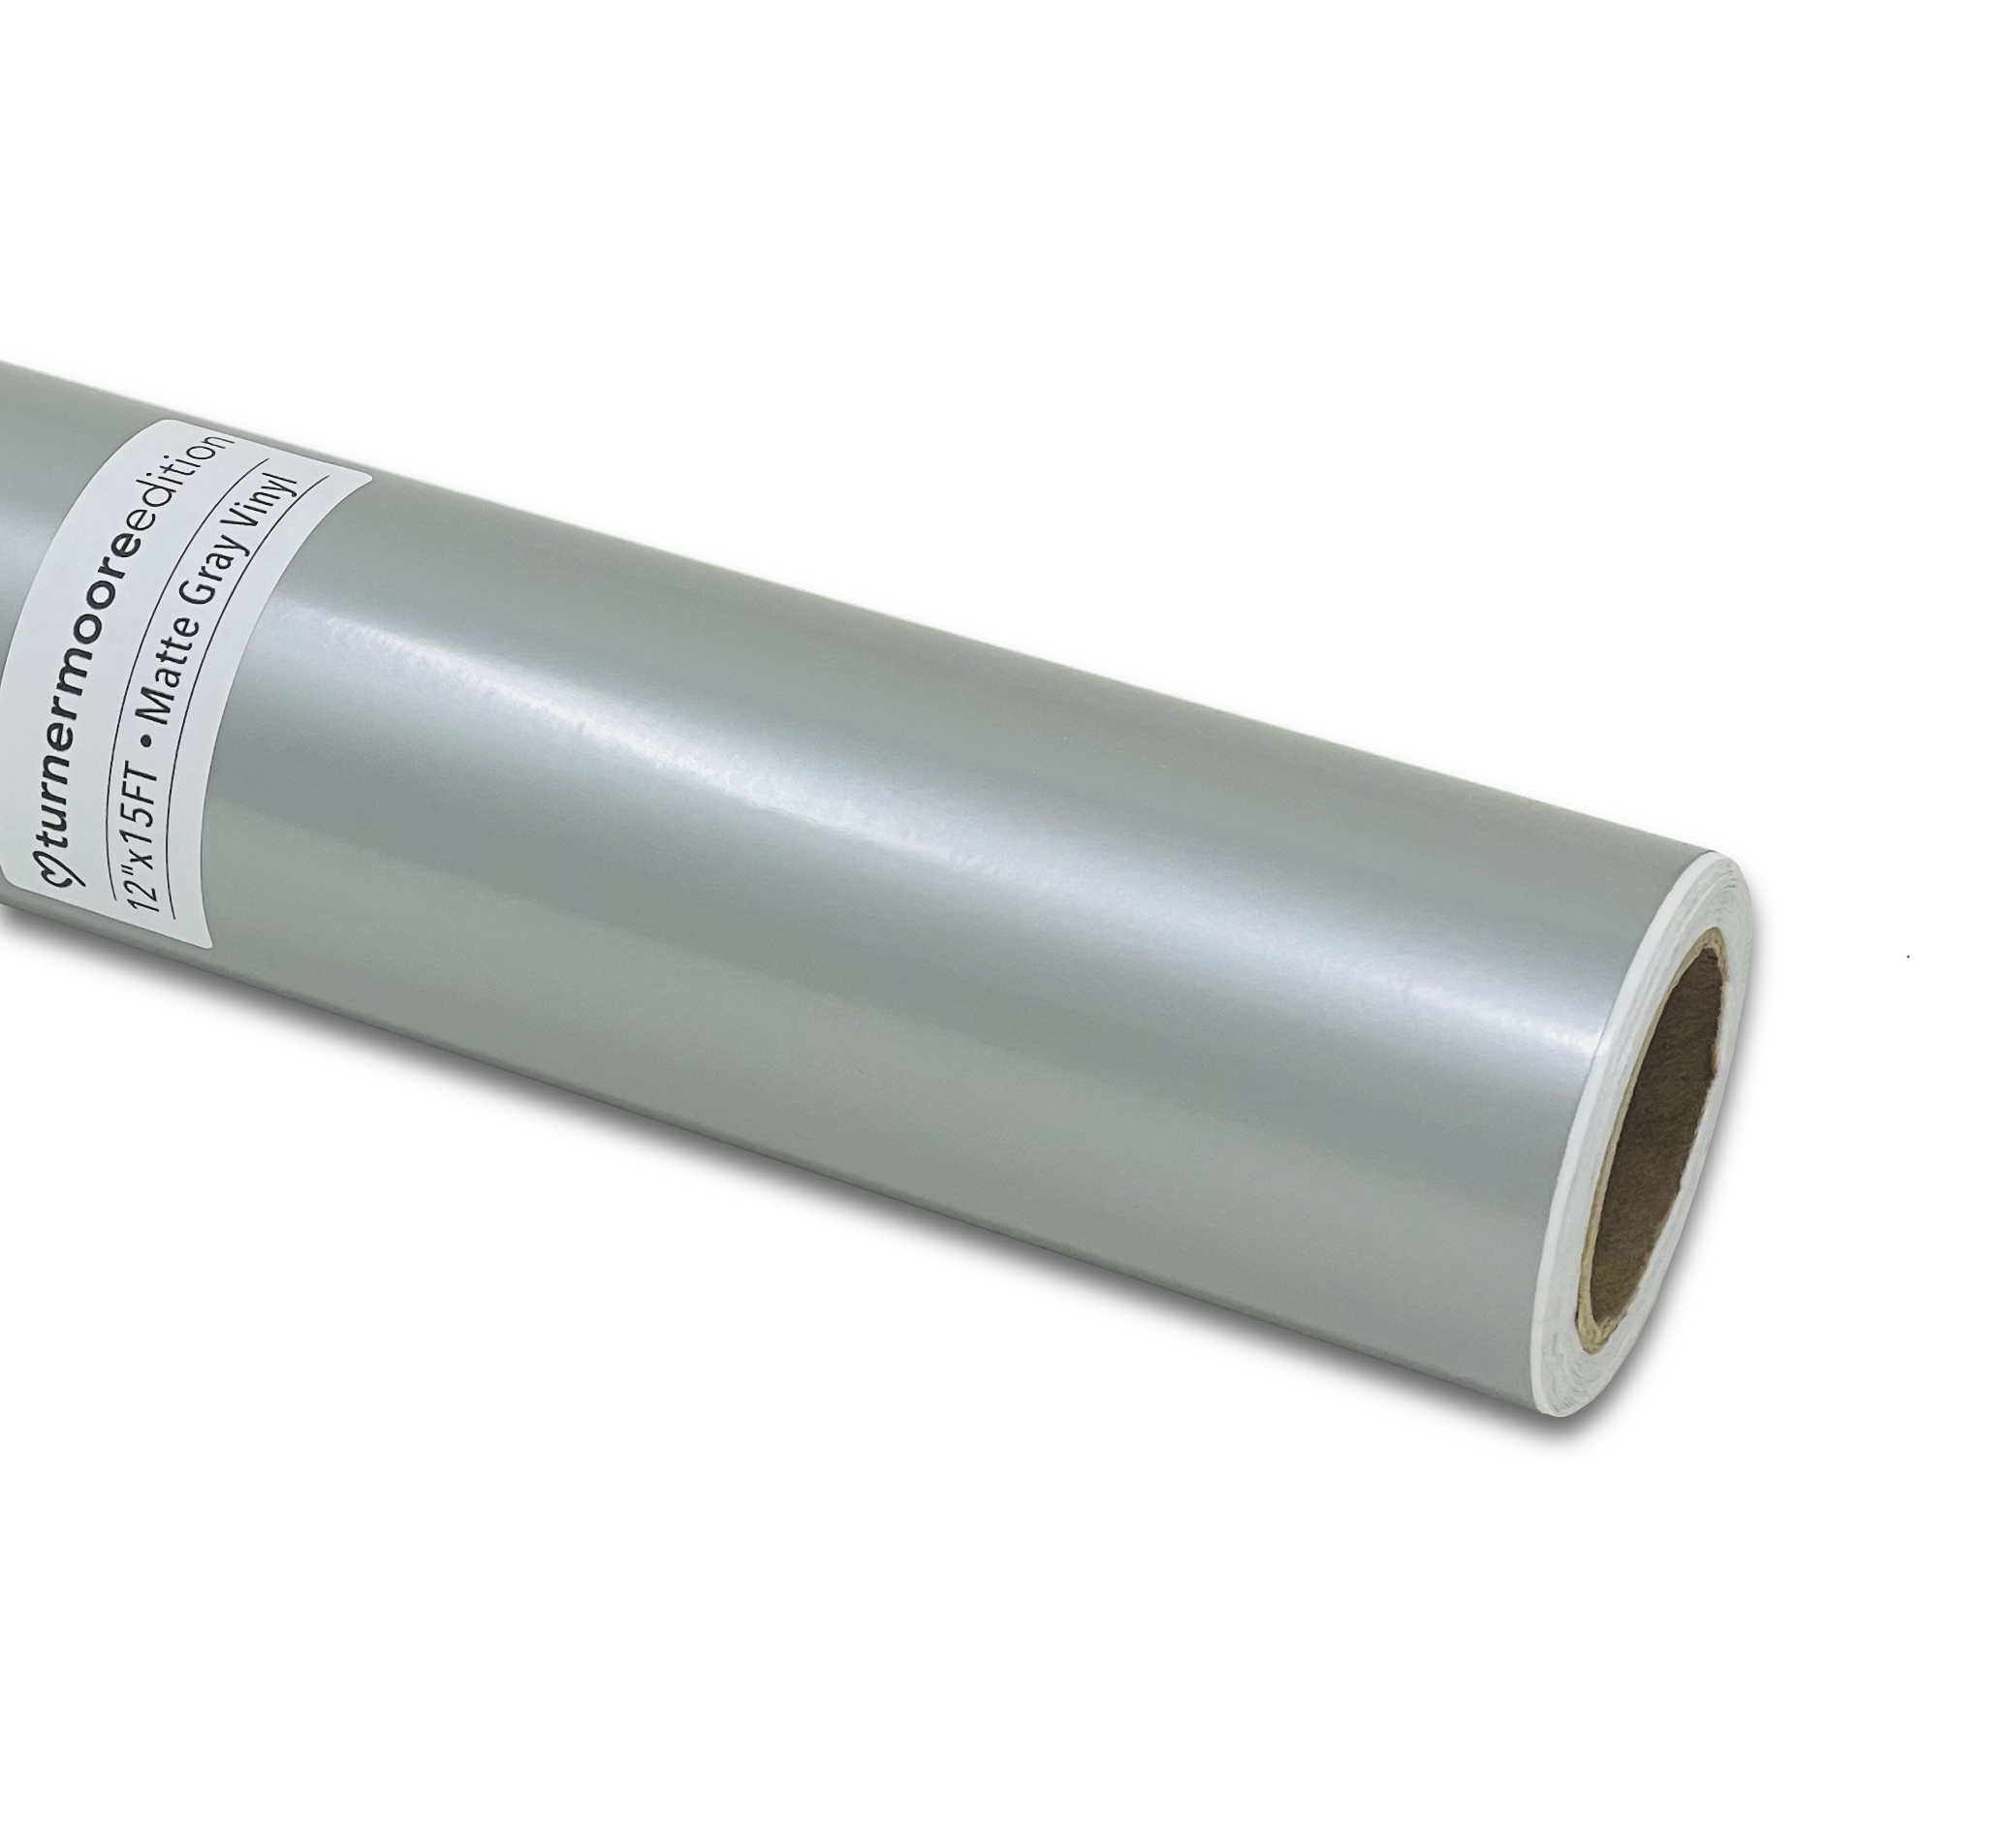 Silver Matte Gray Vinyl Adhesive Roll 12 by 15 FEET, Permanent Silver Vinyl  for Automotive, Signs, Scrapbooking, Cricut, Silhouette Cameo, Plotters and  Die Cutters by Turner Moore Edition 